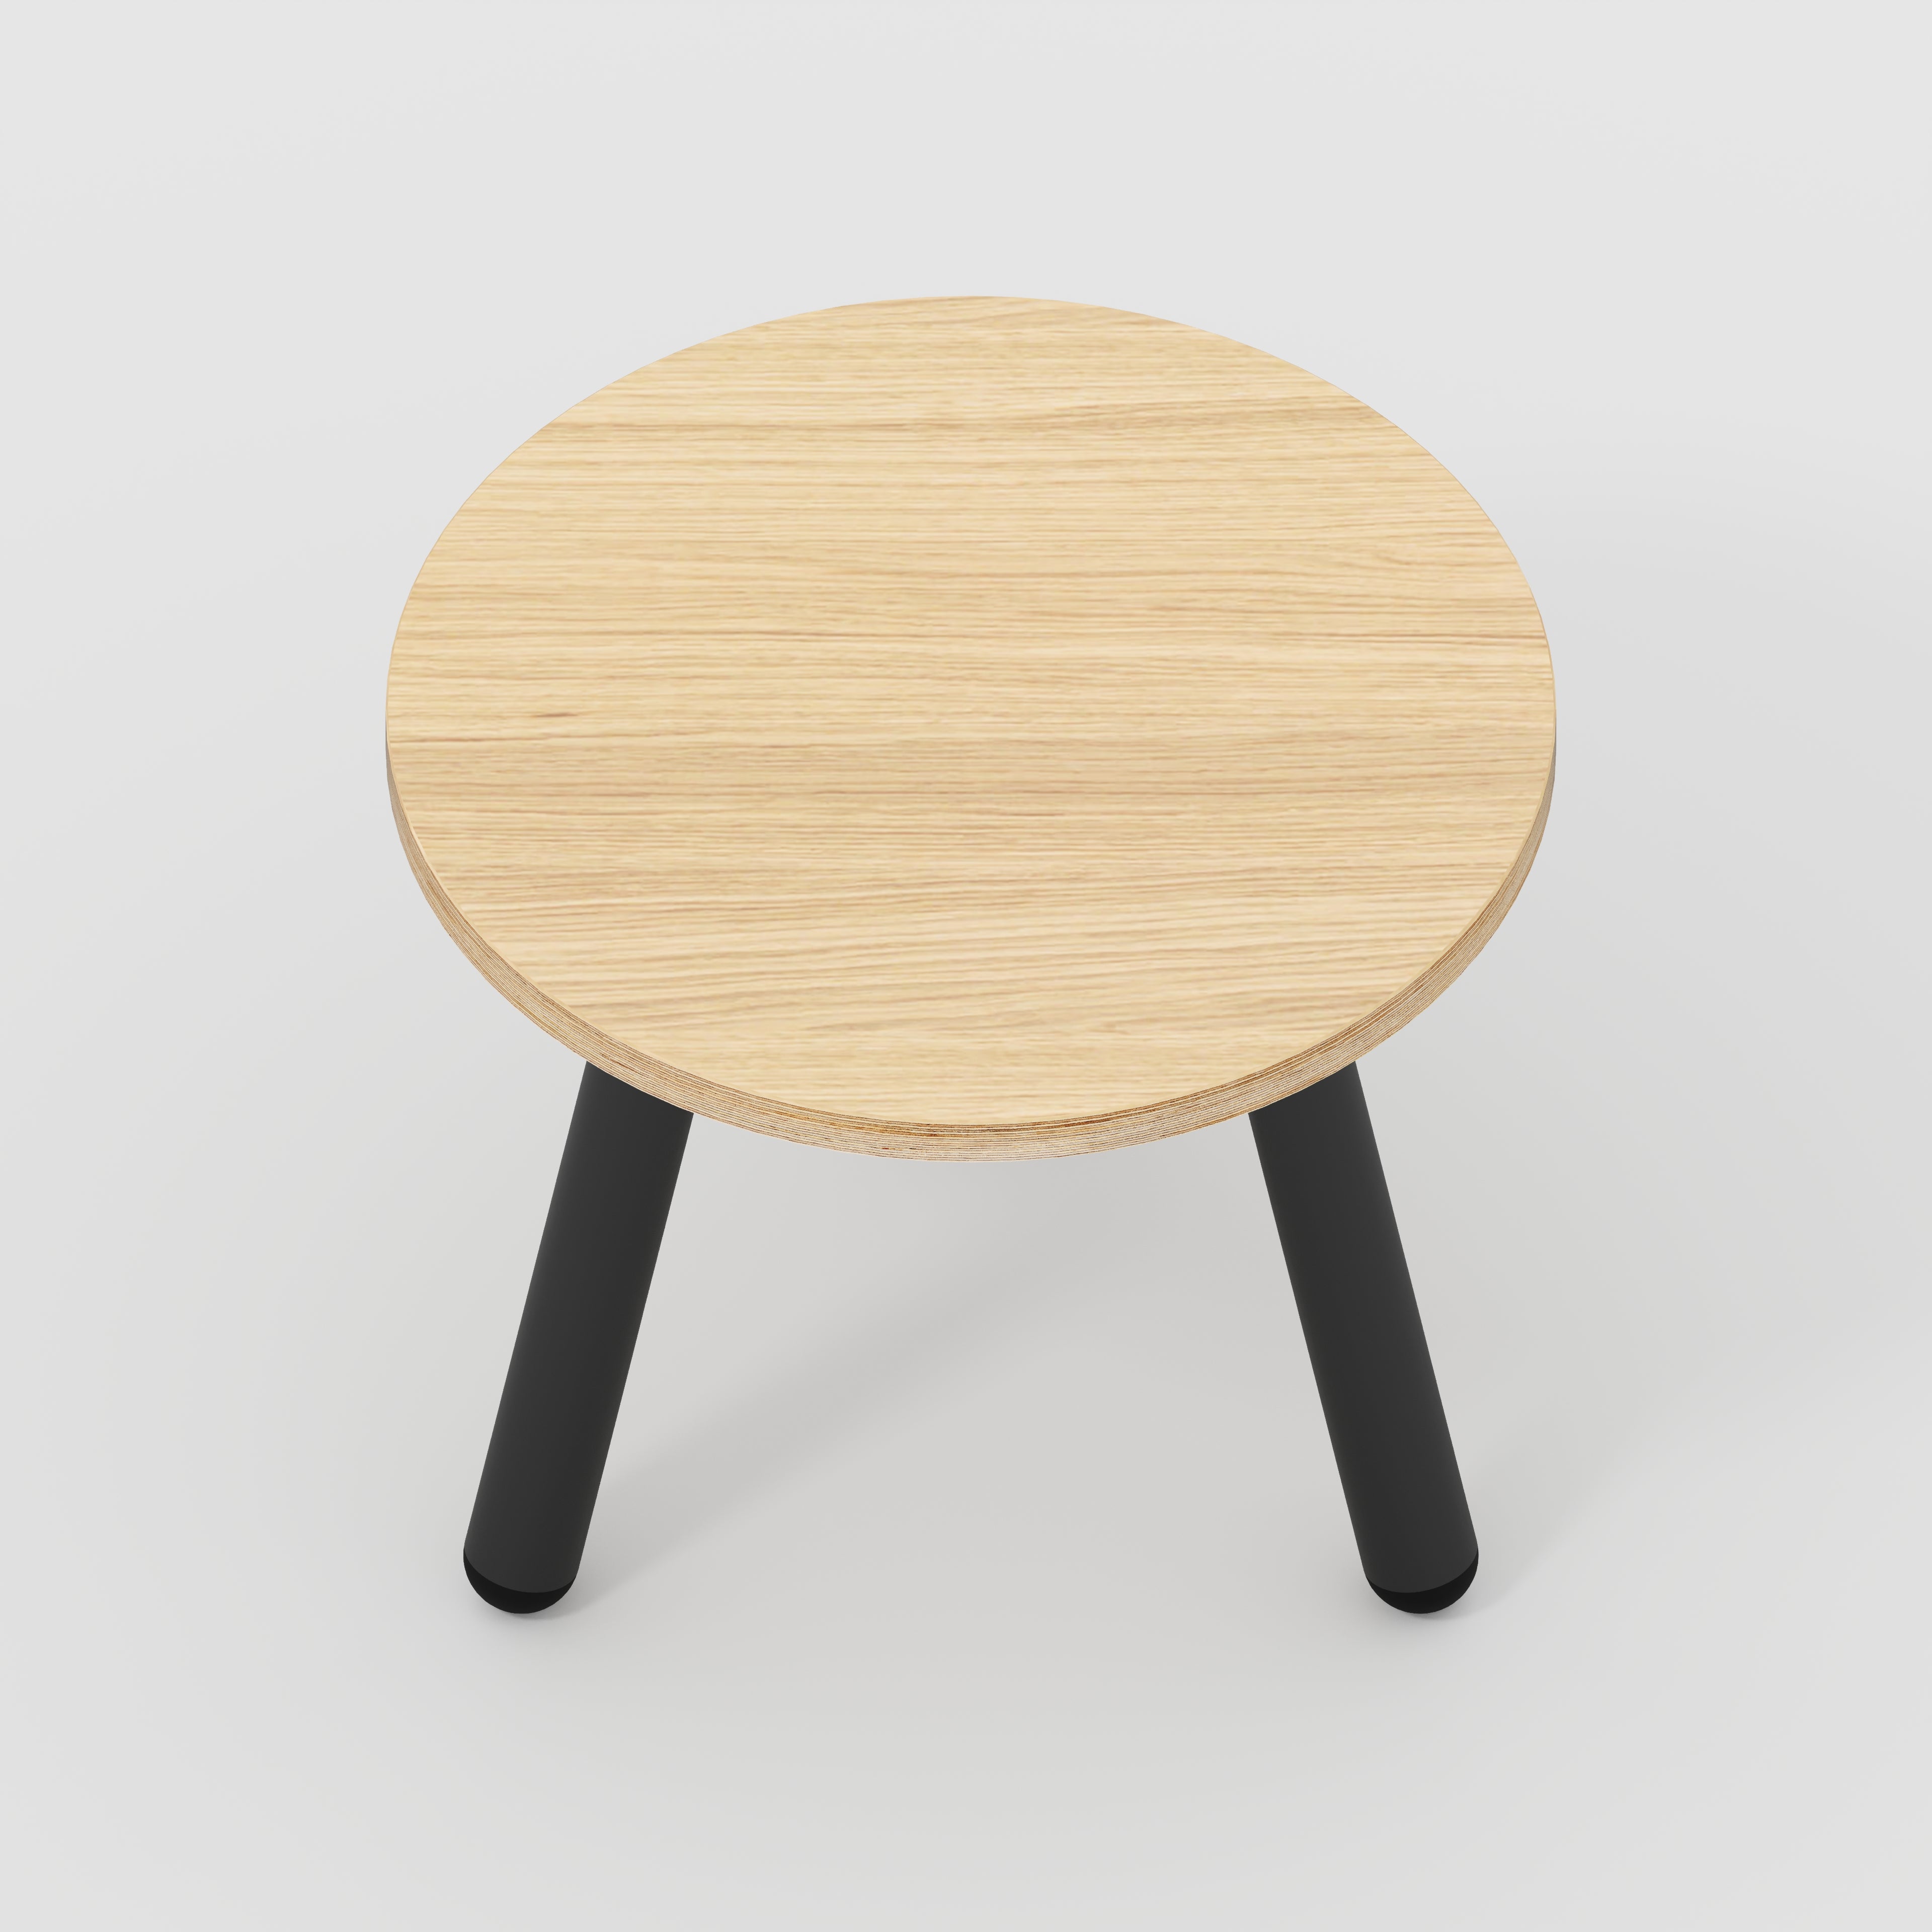 Round Side Table with Black Round Single Pin Legs - Plywood Oak - 500(w) x 500(d) x 425(h)